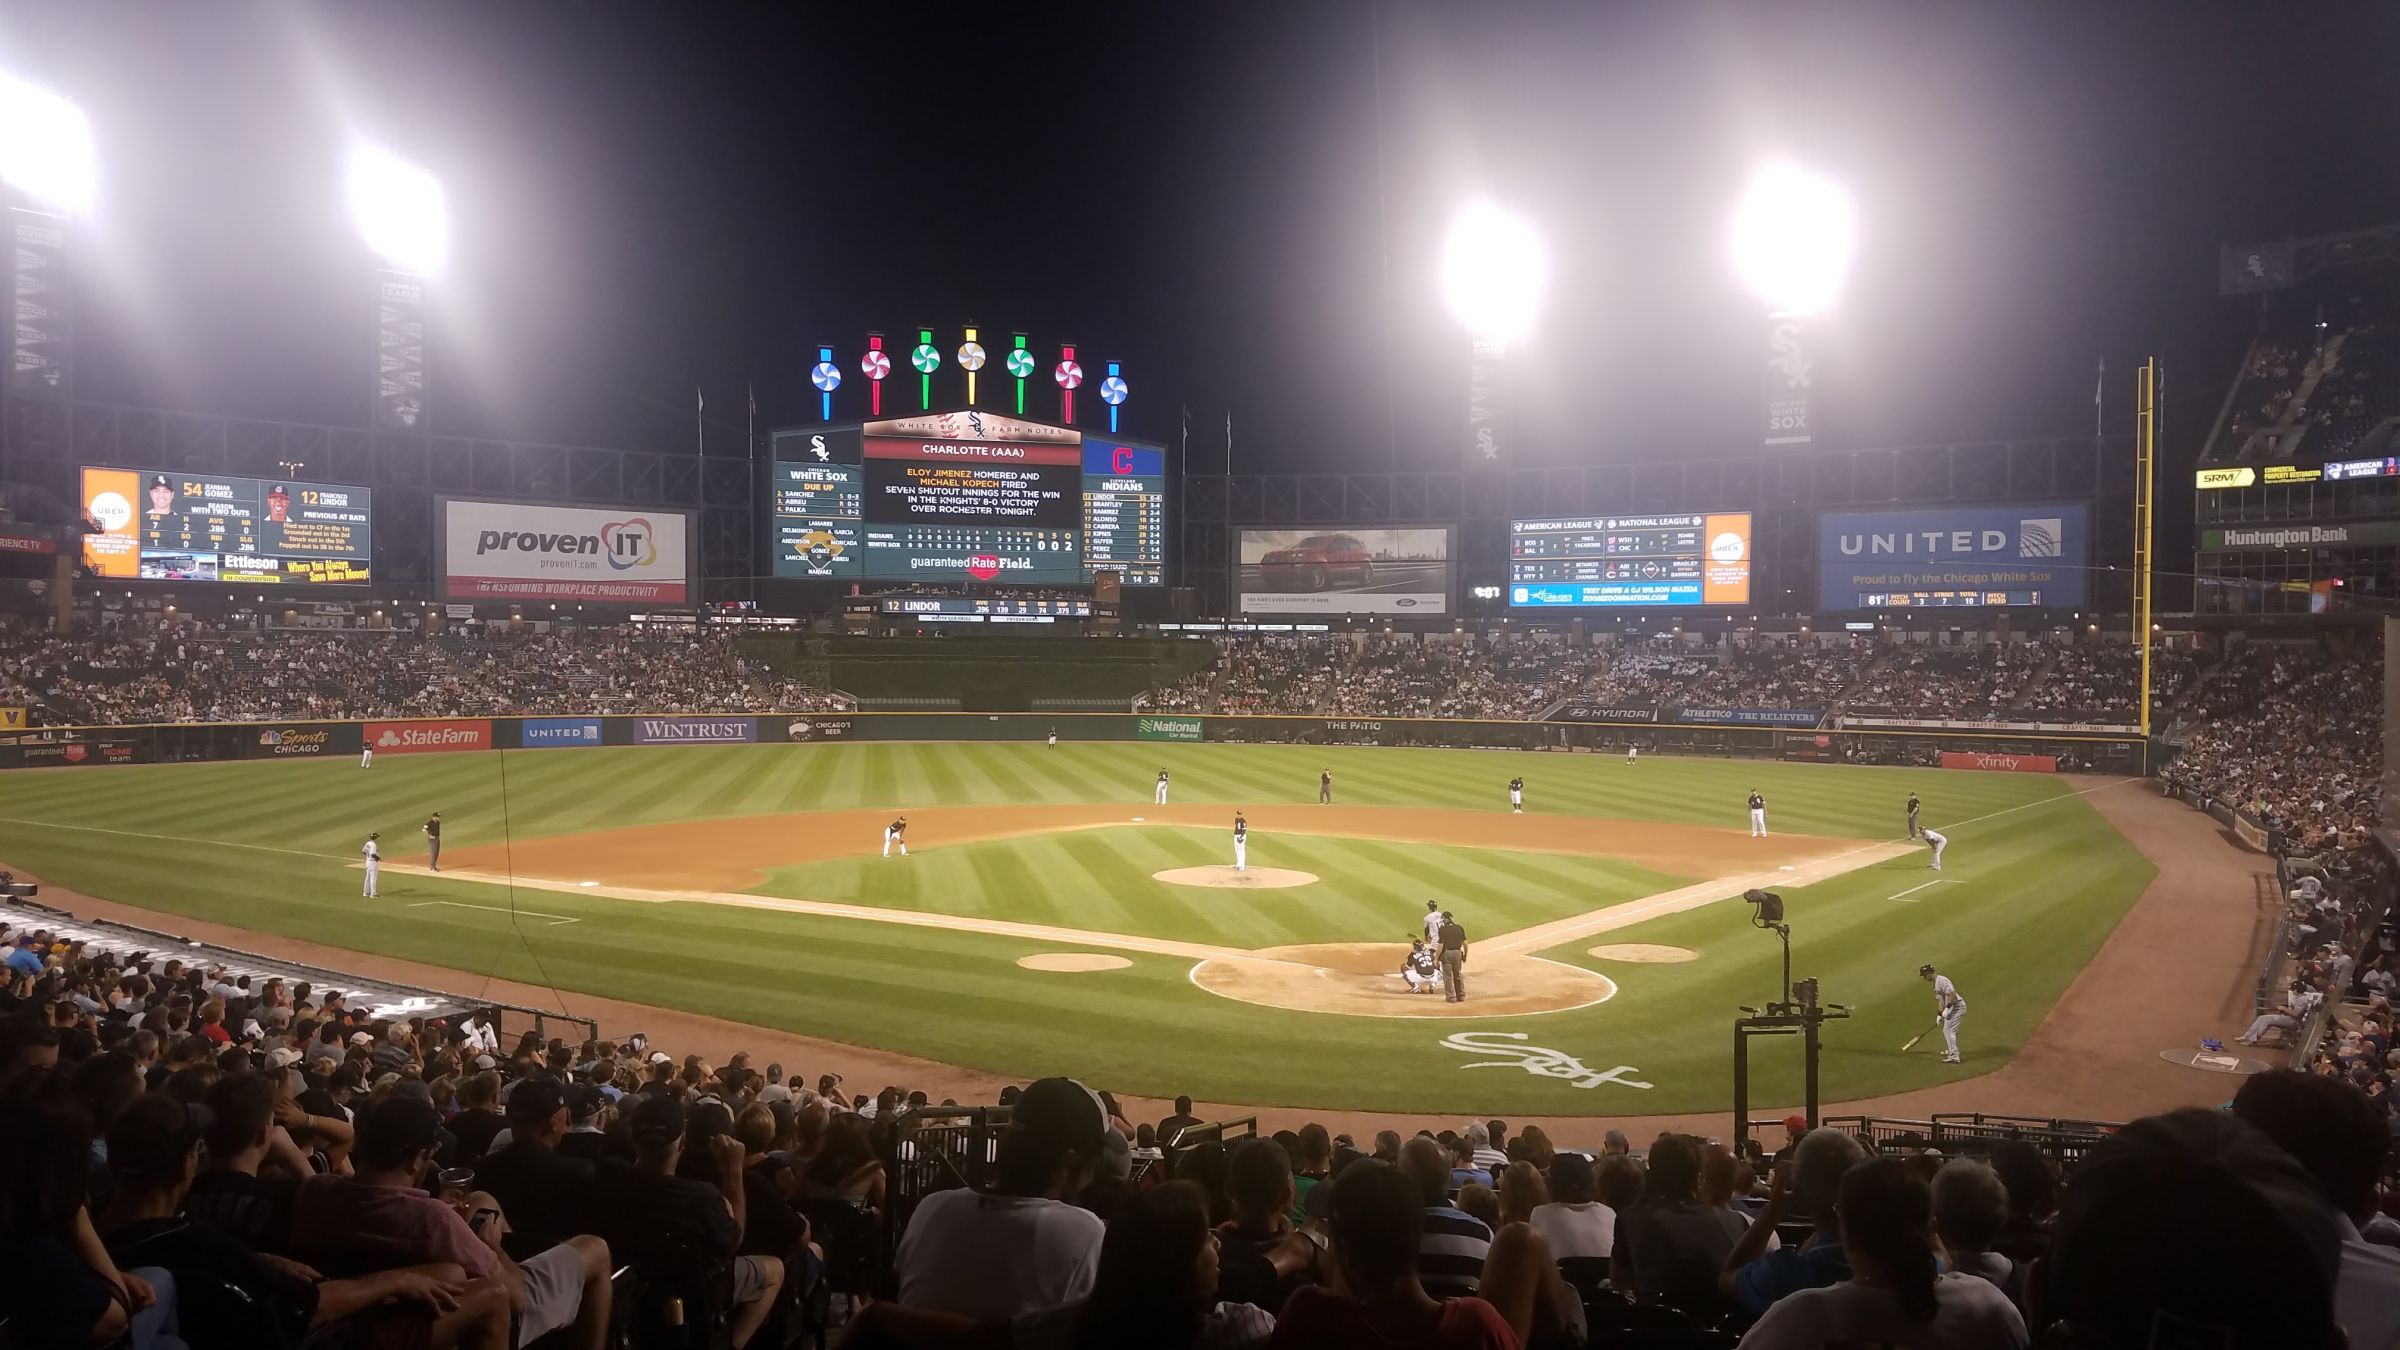 section 133, row 29 seat view  - guaranteed rate field